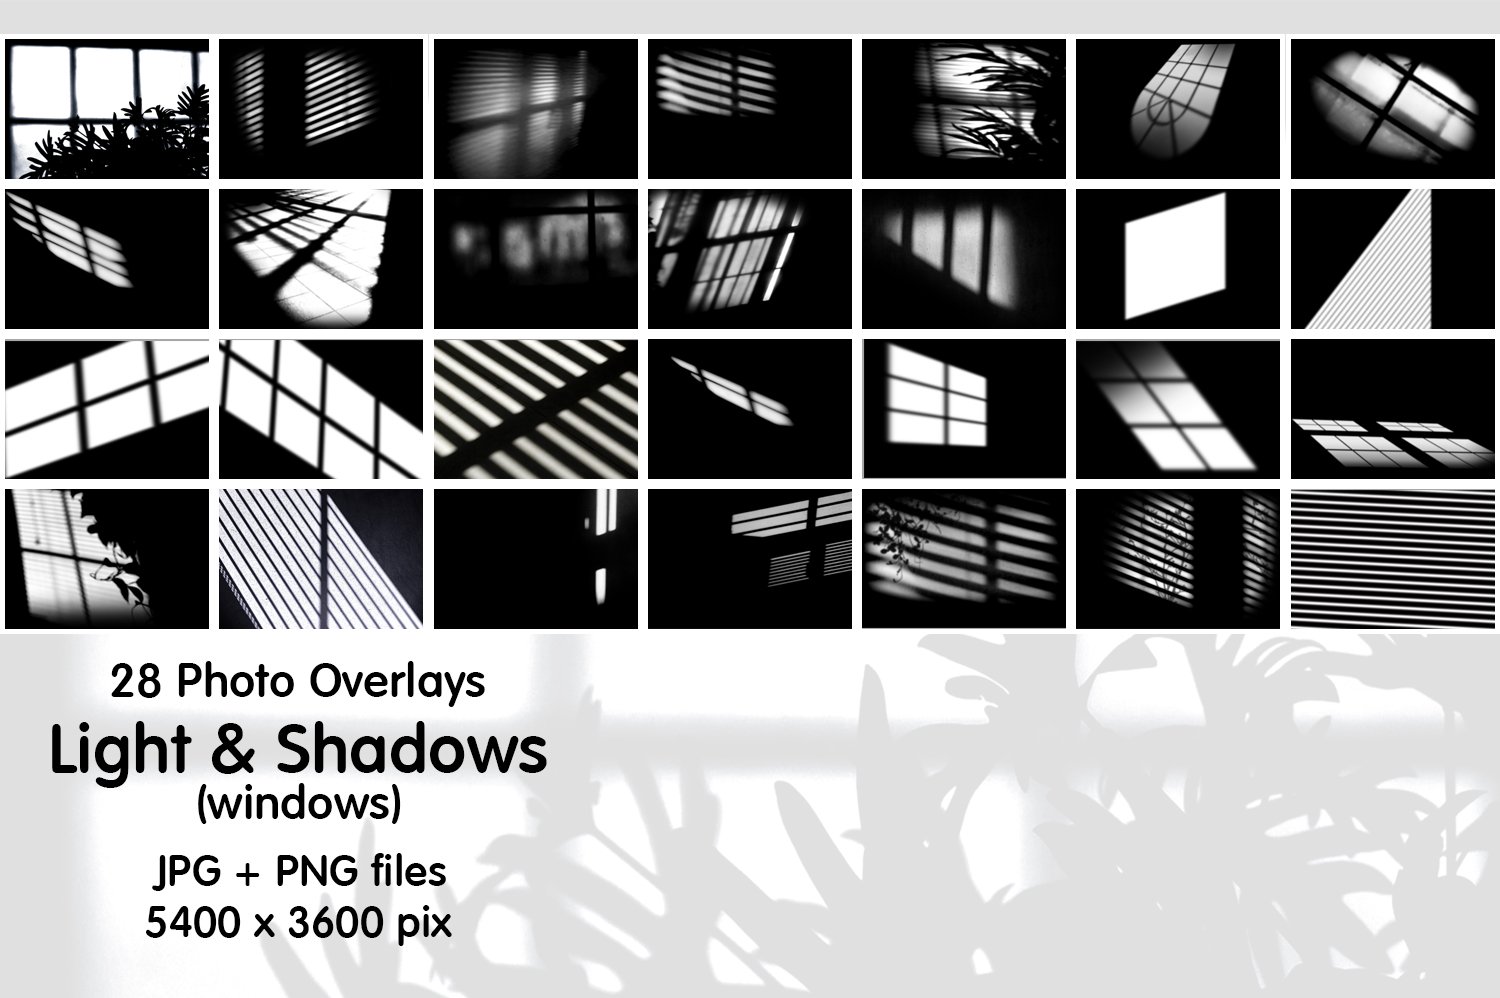 Light and Shadows. Window overlayspreview image.